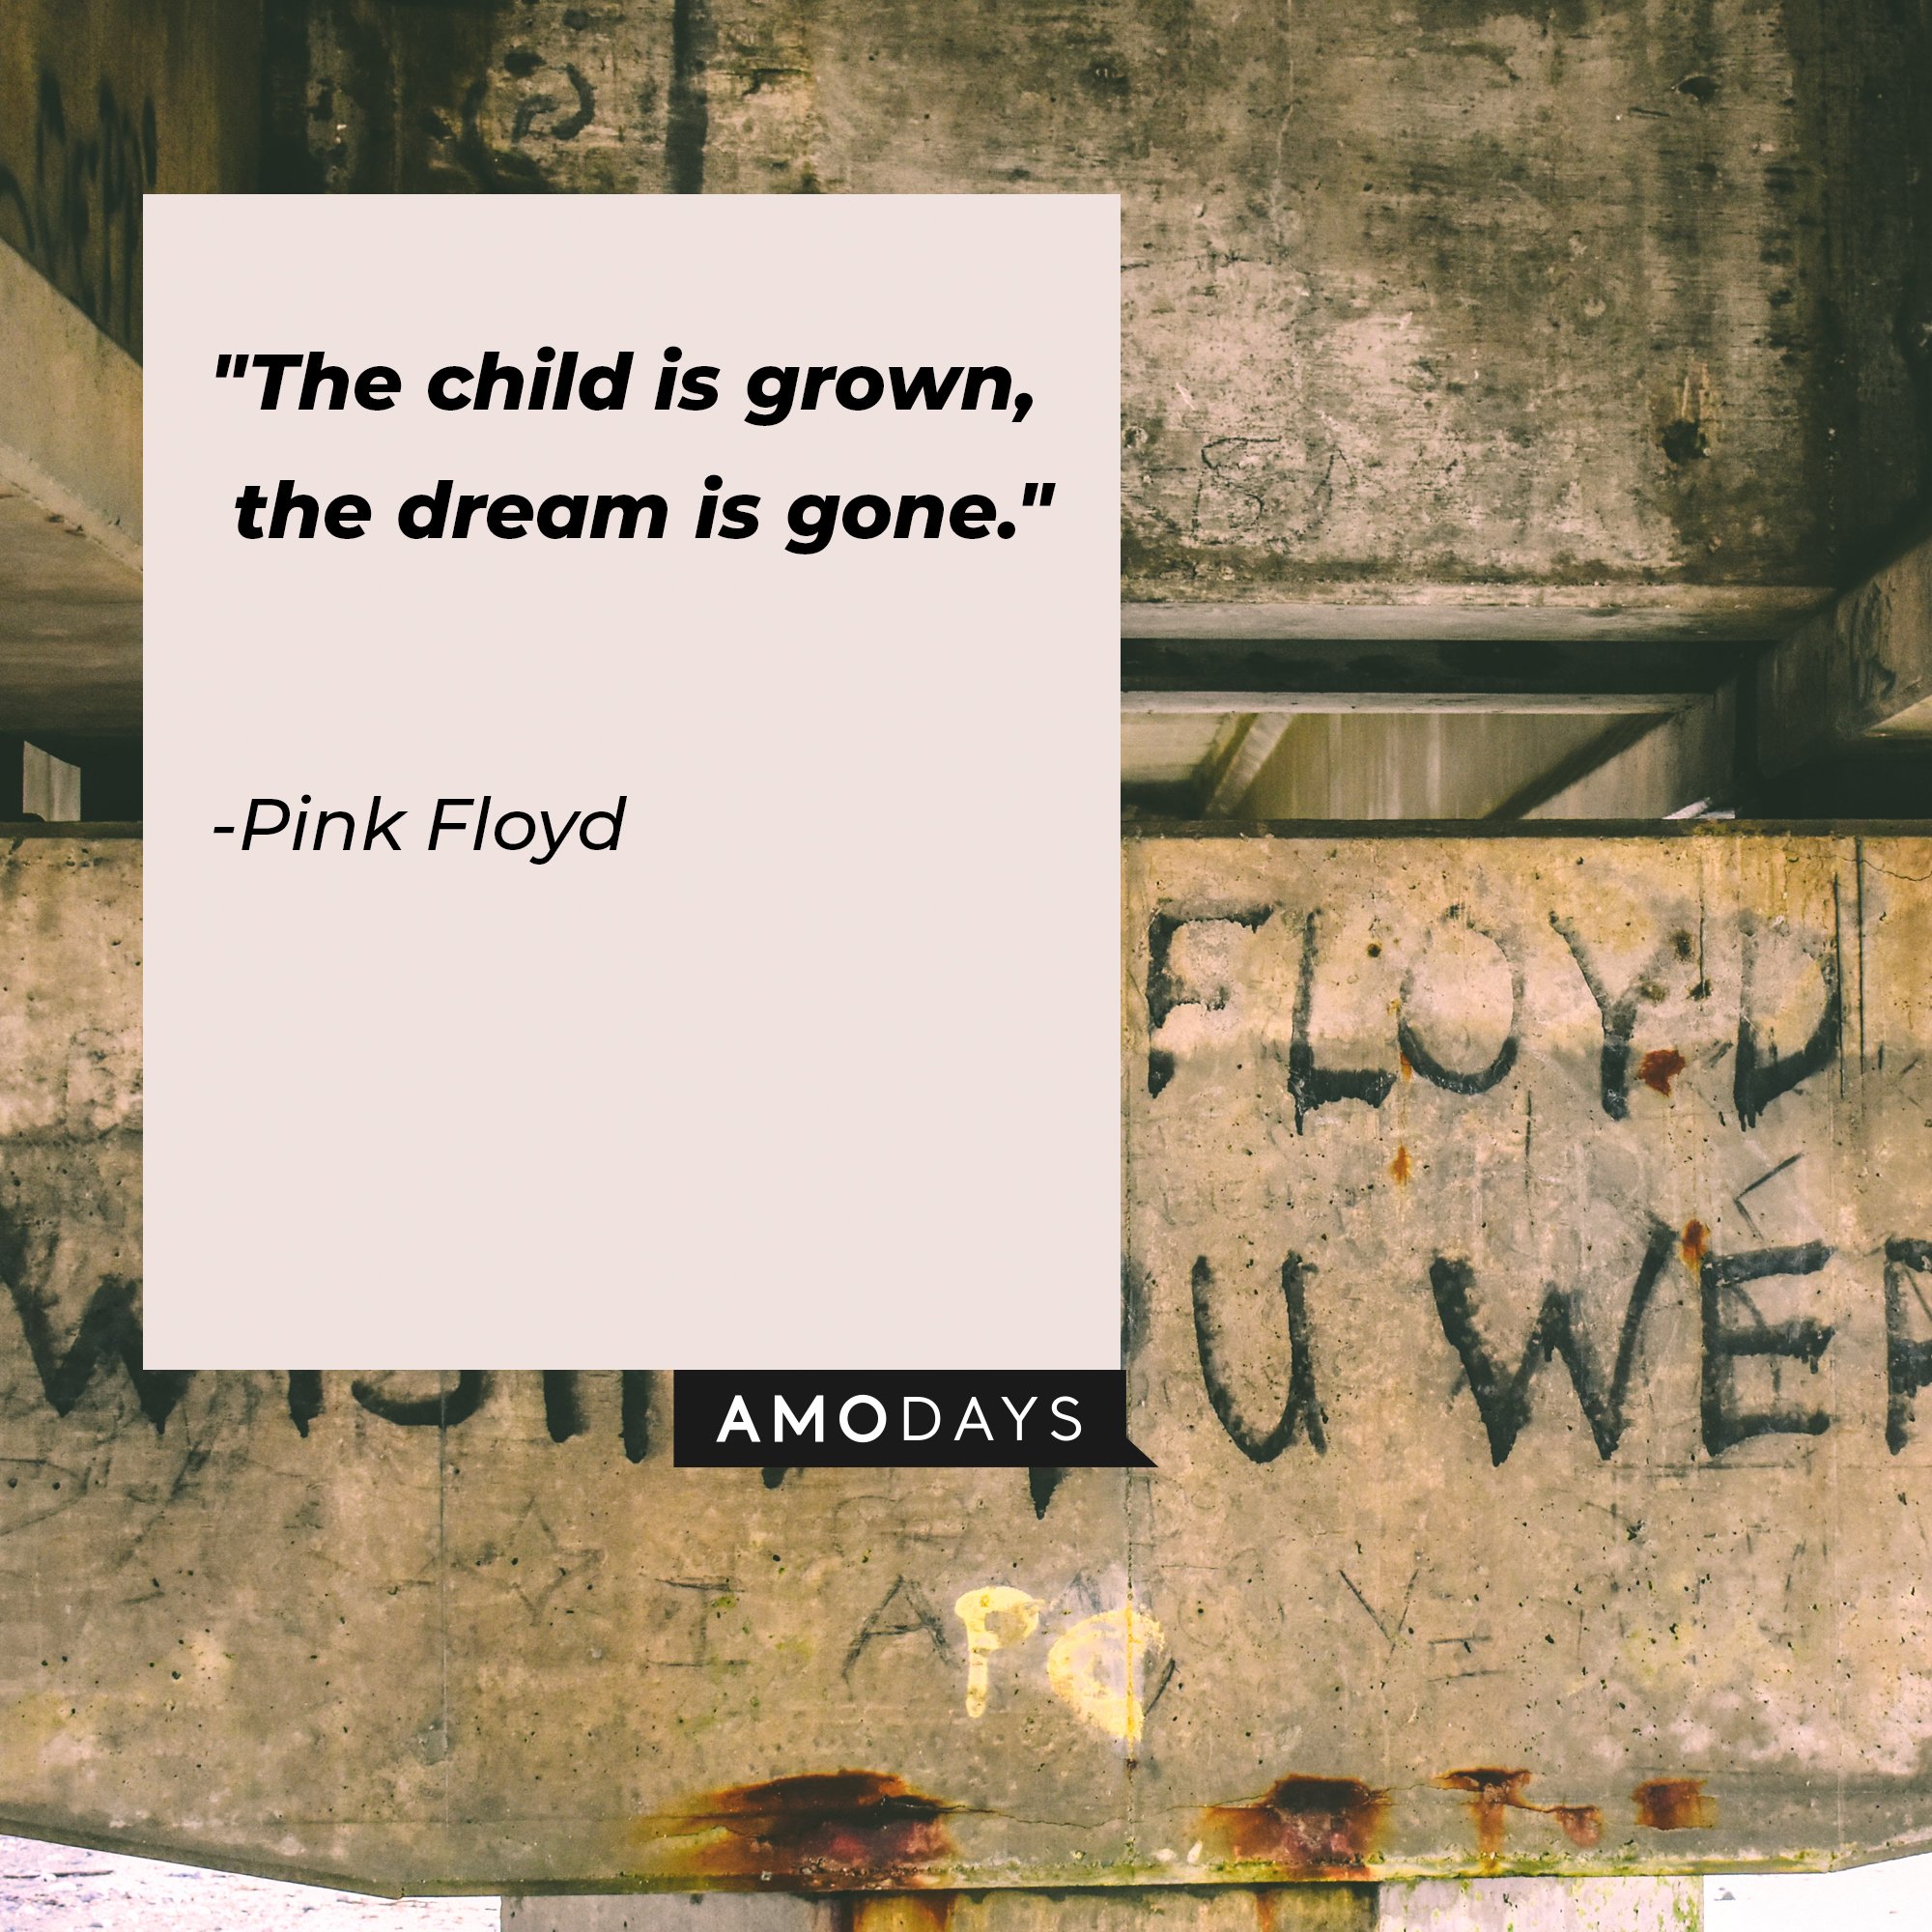 Pink Floyd's quote: "The child is grown, the dream is gone." | Image: AmoDays